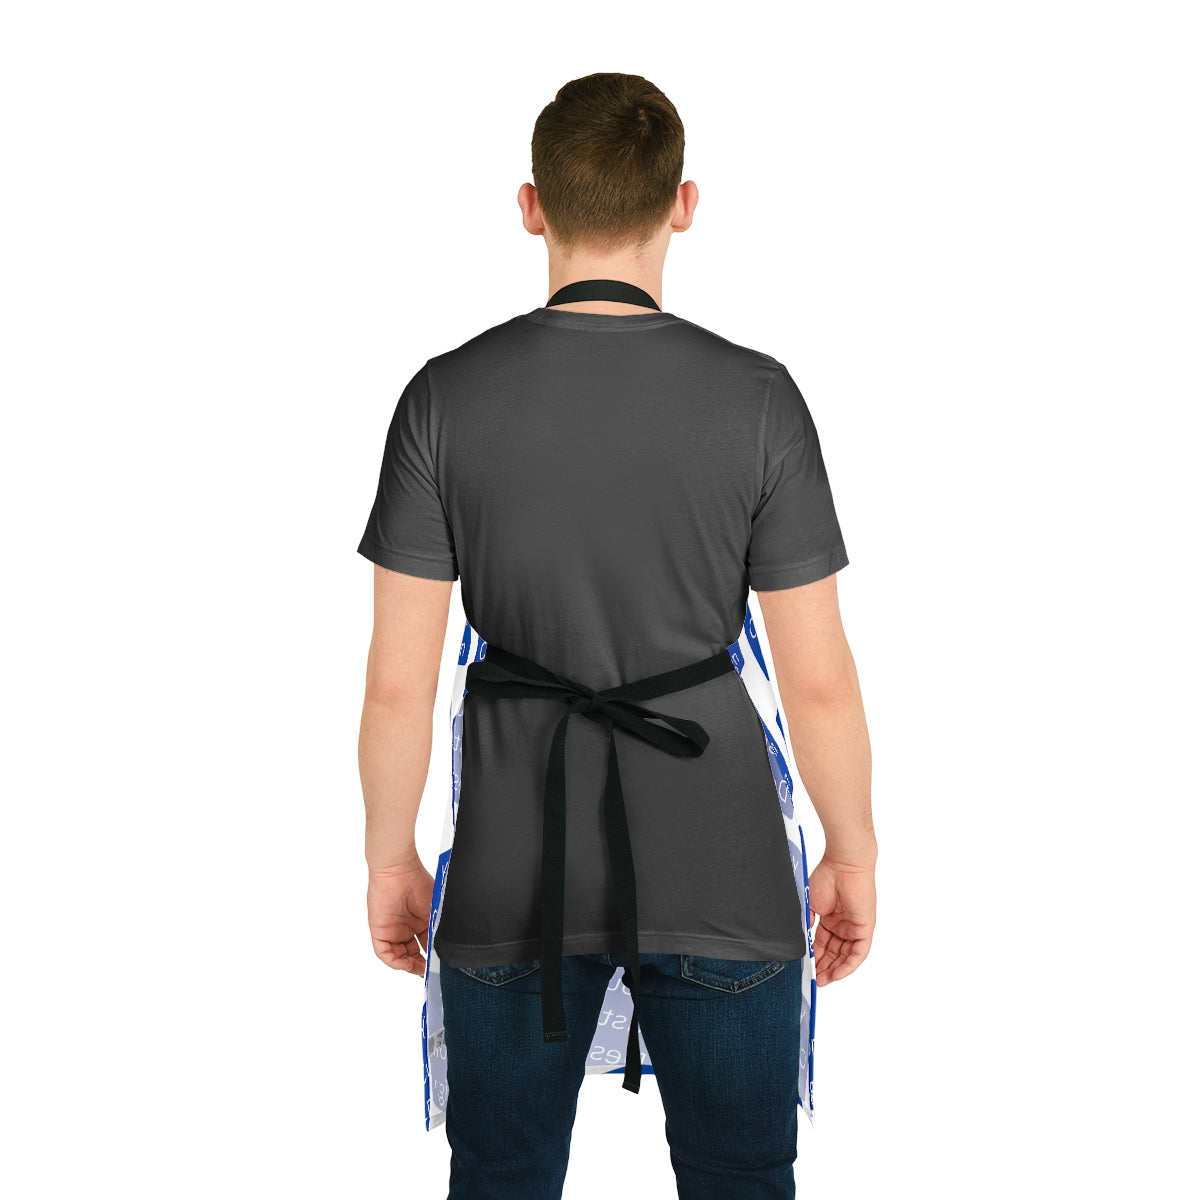 Customizatble Apron - All over Print or Single Logo / Graphic with optional Personalization